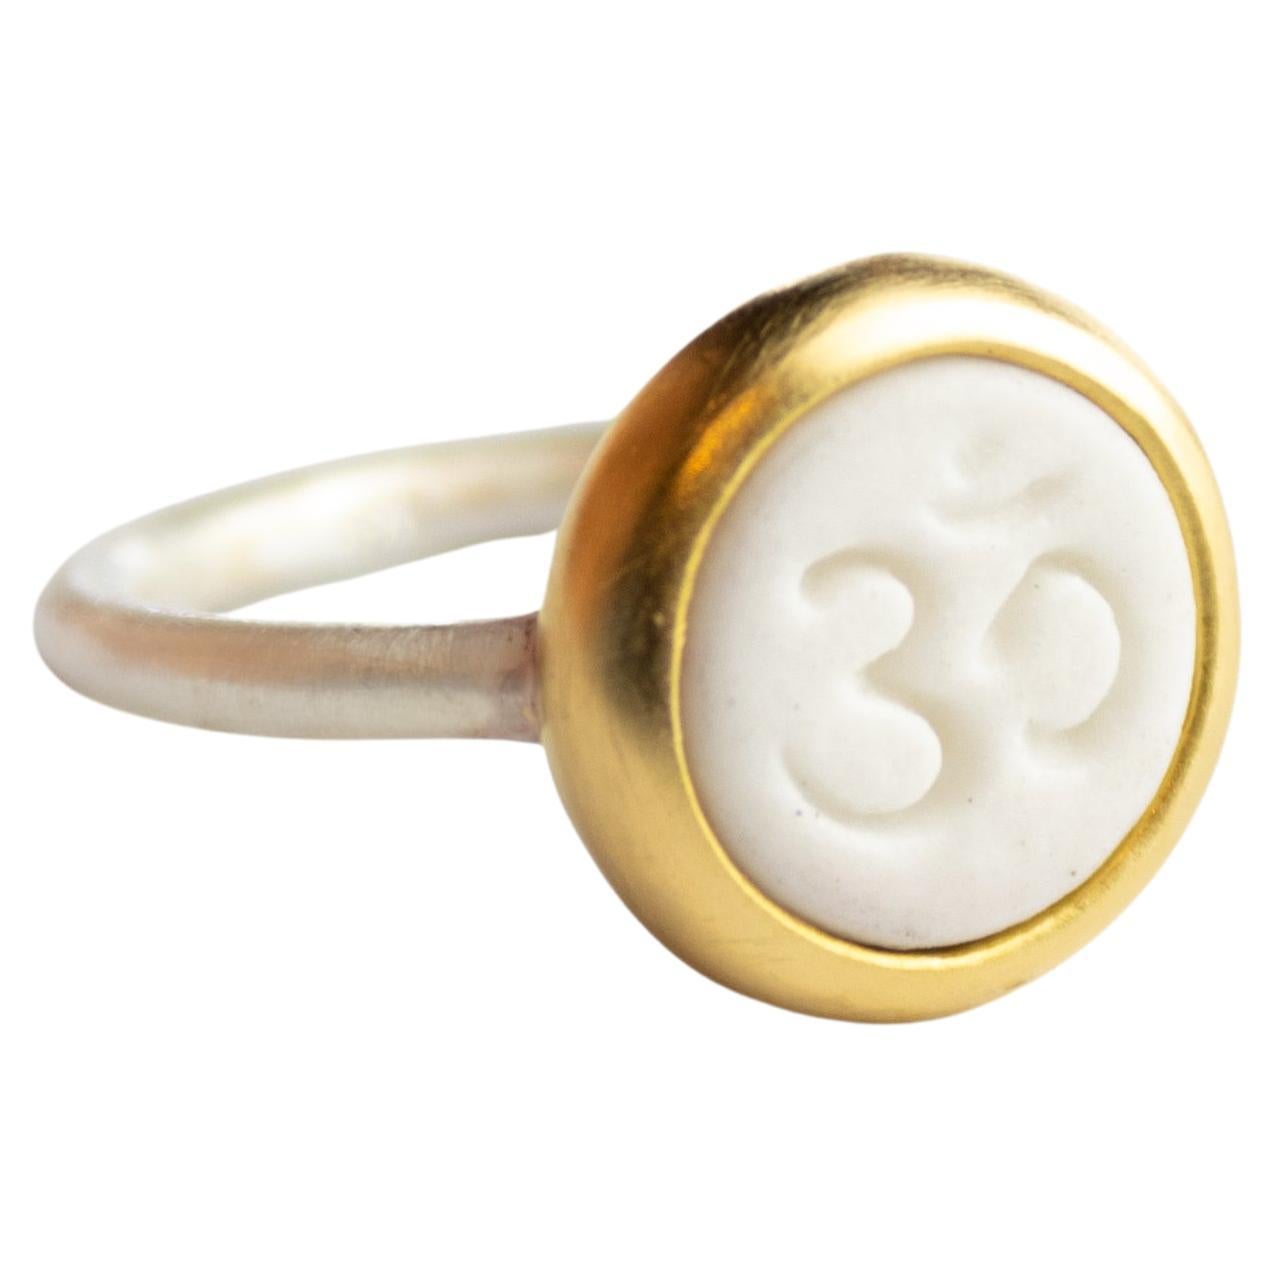 For Sale:  Monika Herré Porcelain Ring Ohm Symbol Small sterling silver gold-plated